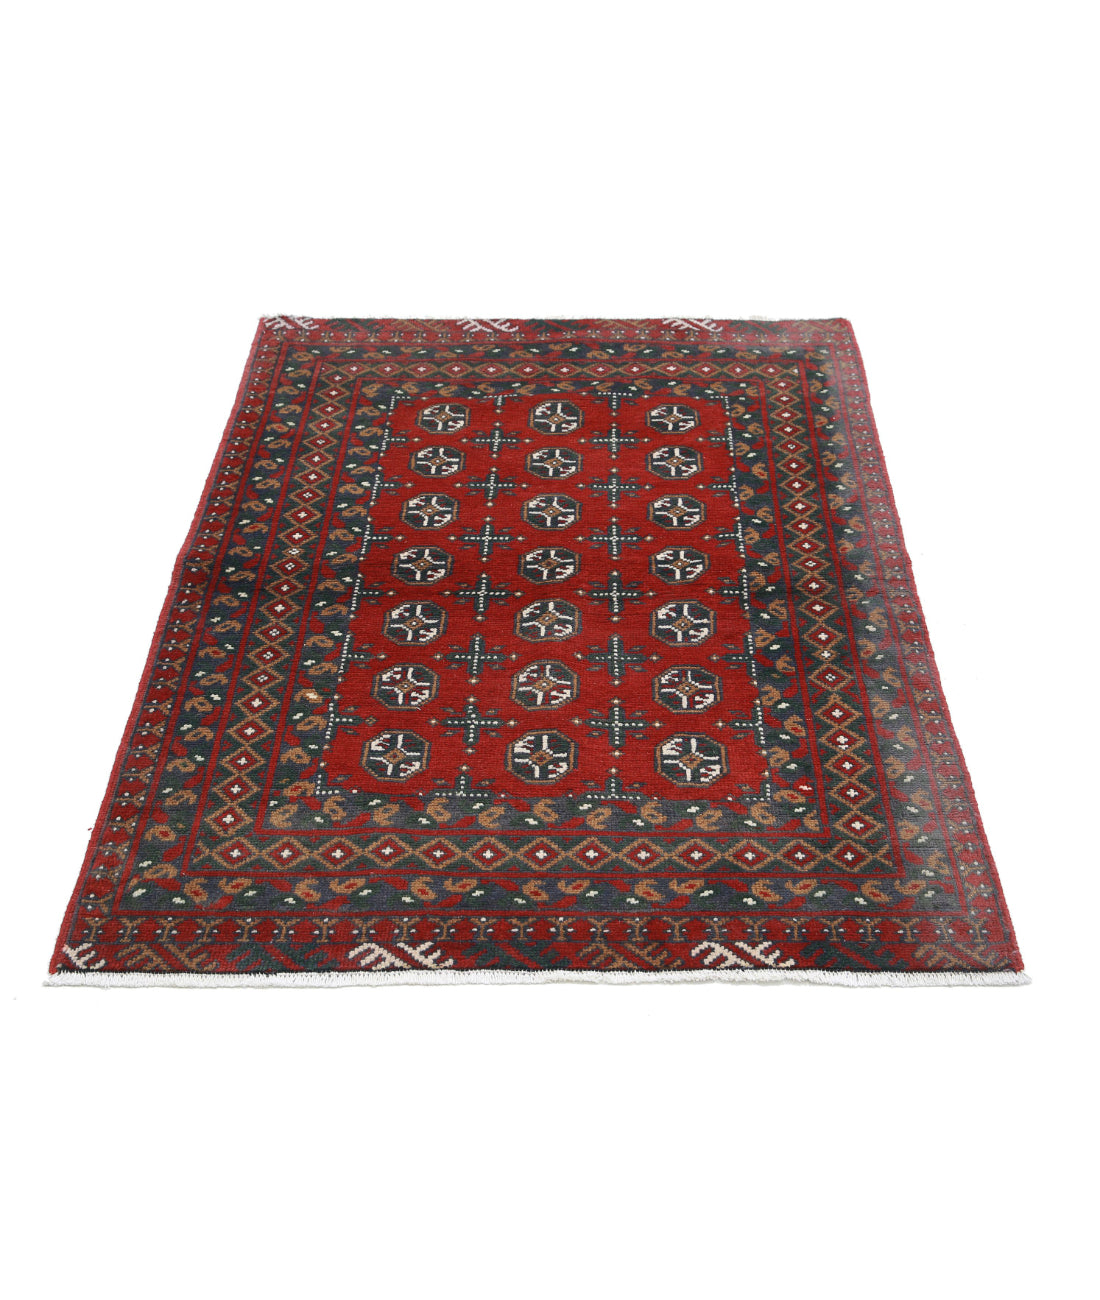 Revival 3'5'' X 4'10'' Hand-Knotted Wool Rug 3'5'' x 4'10'' (103 X 145) / Red / Grey